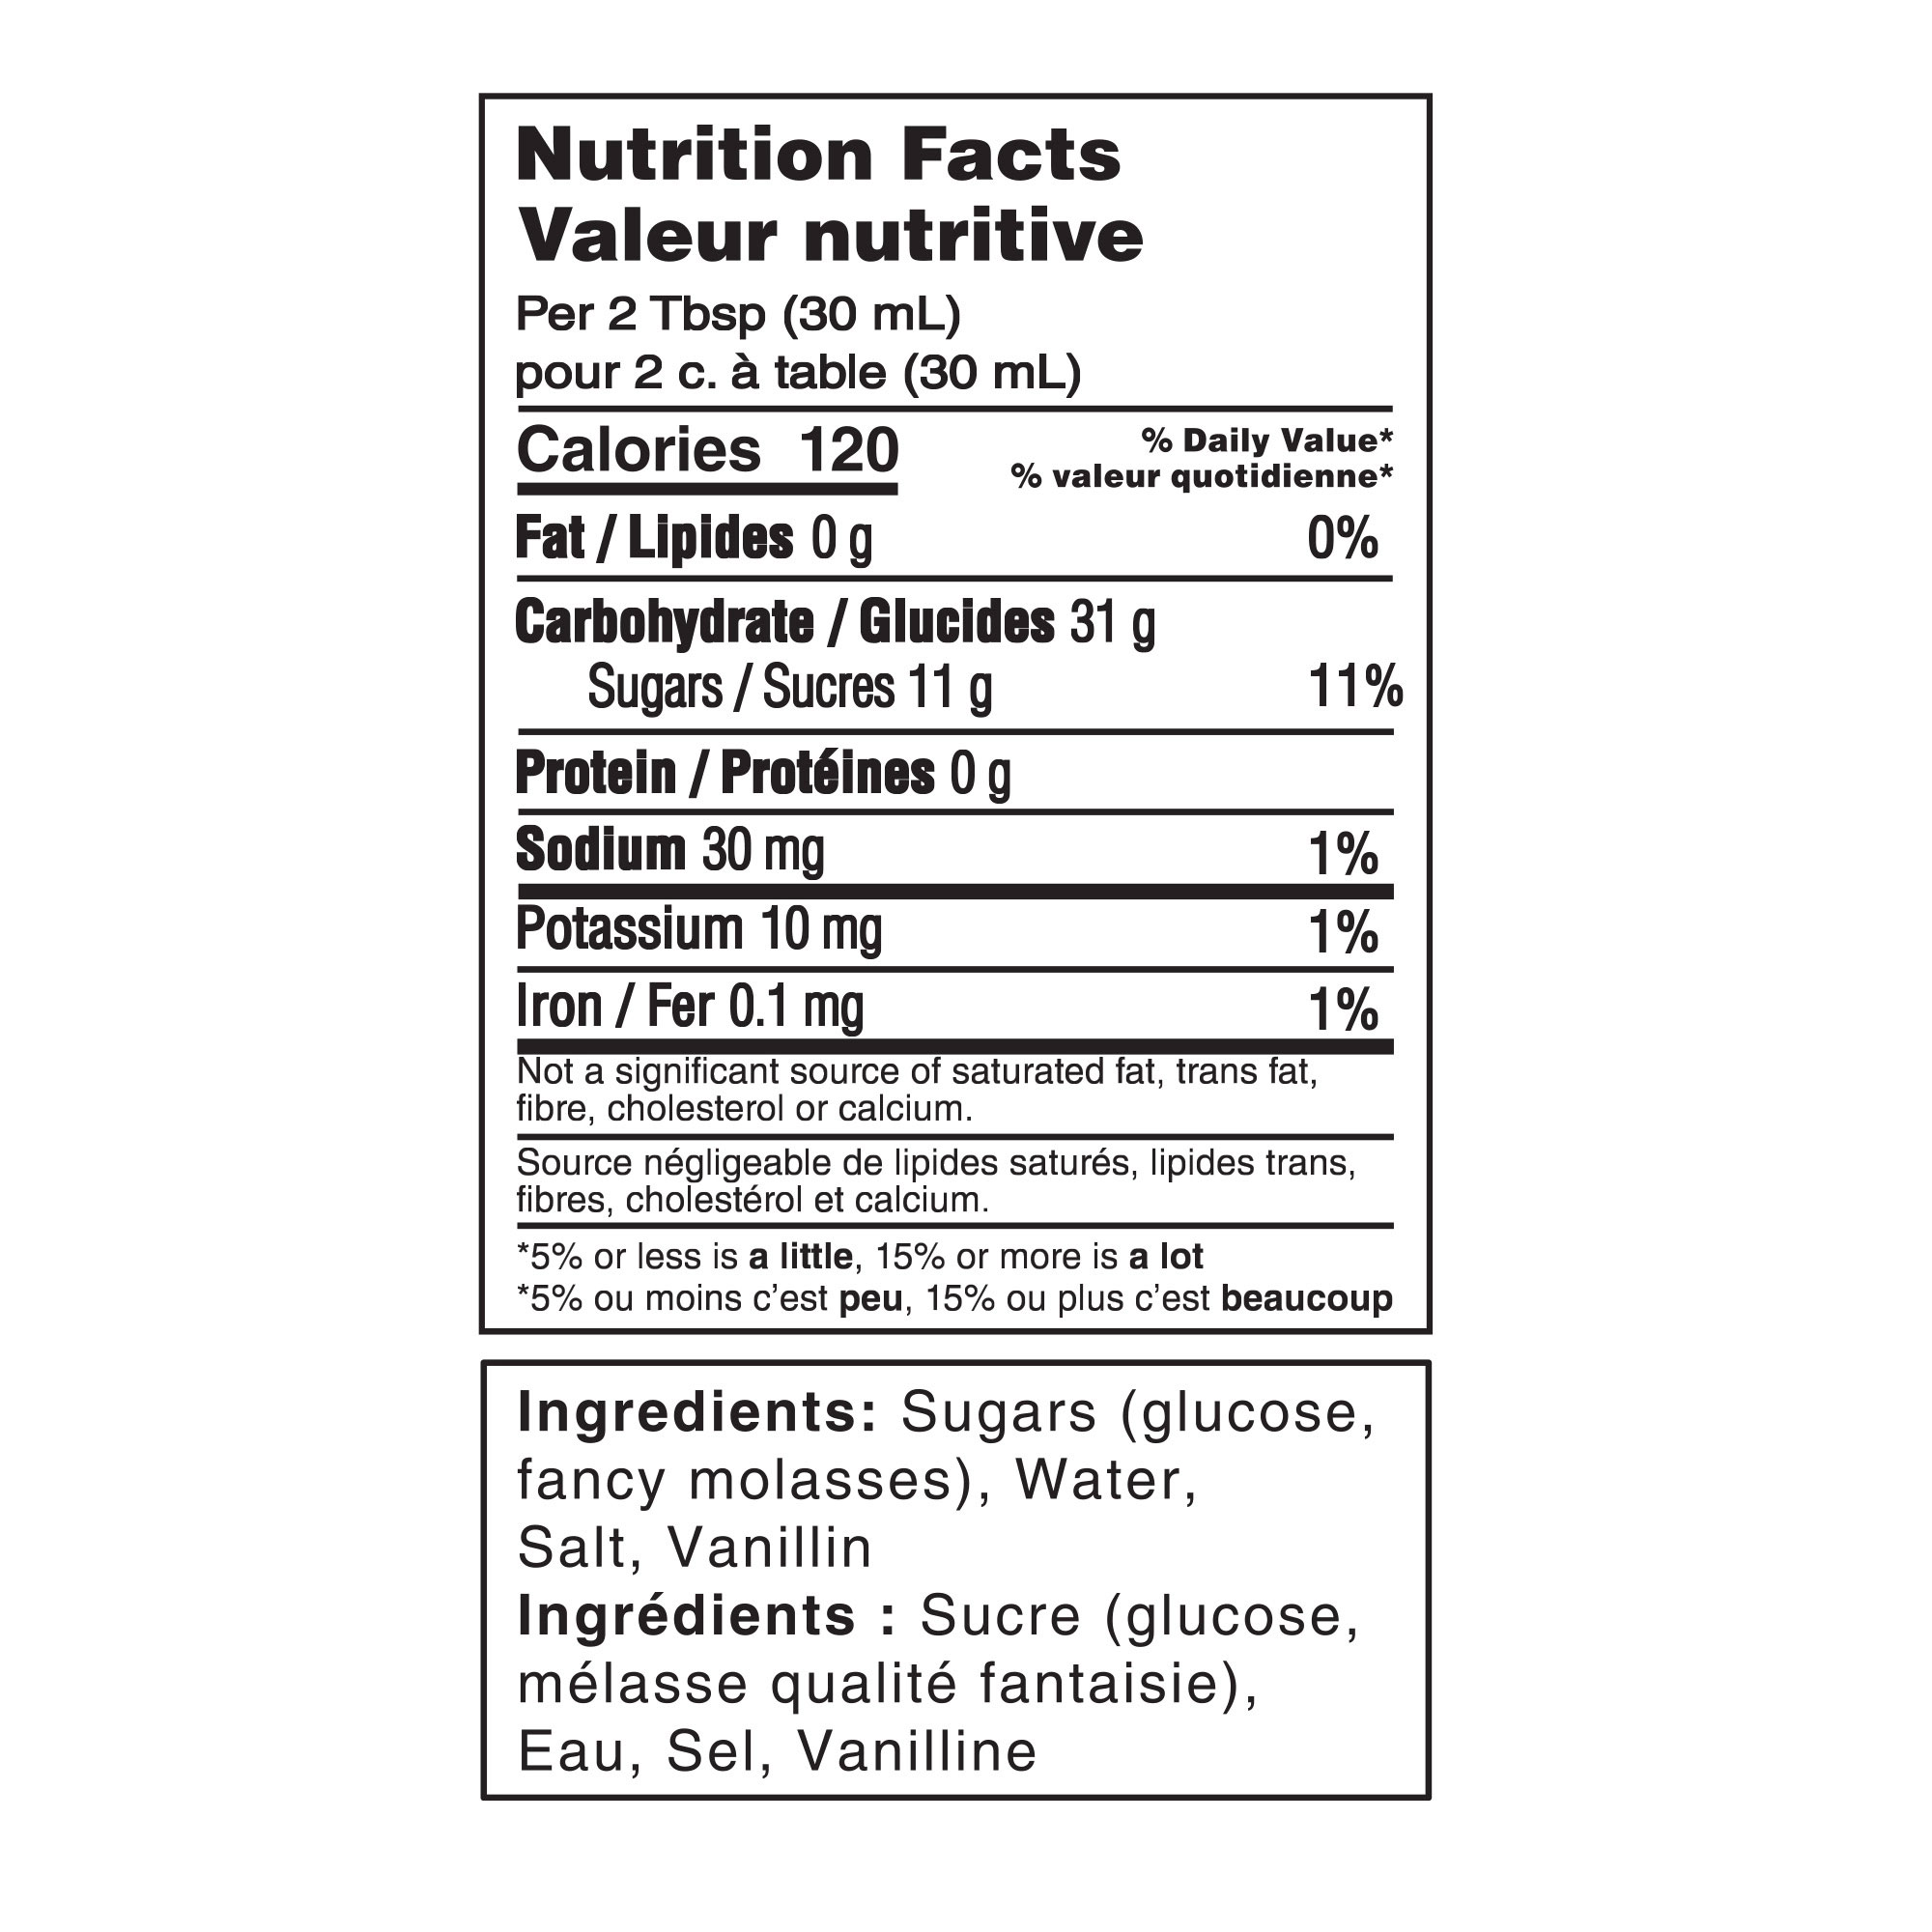 Crown® Golden Corn Syrup Nutritional Facts